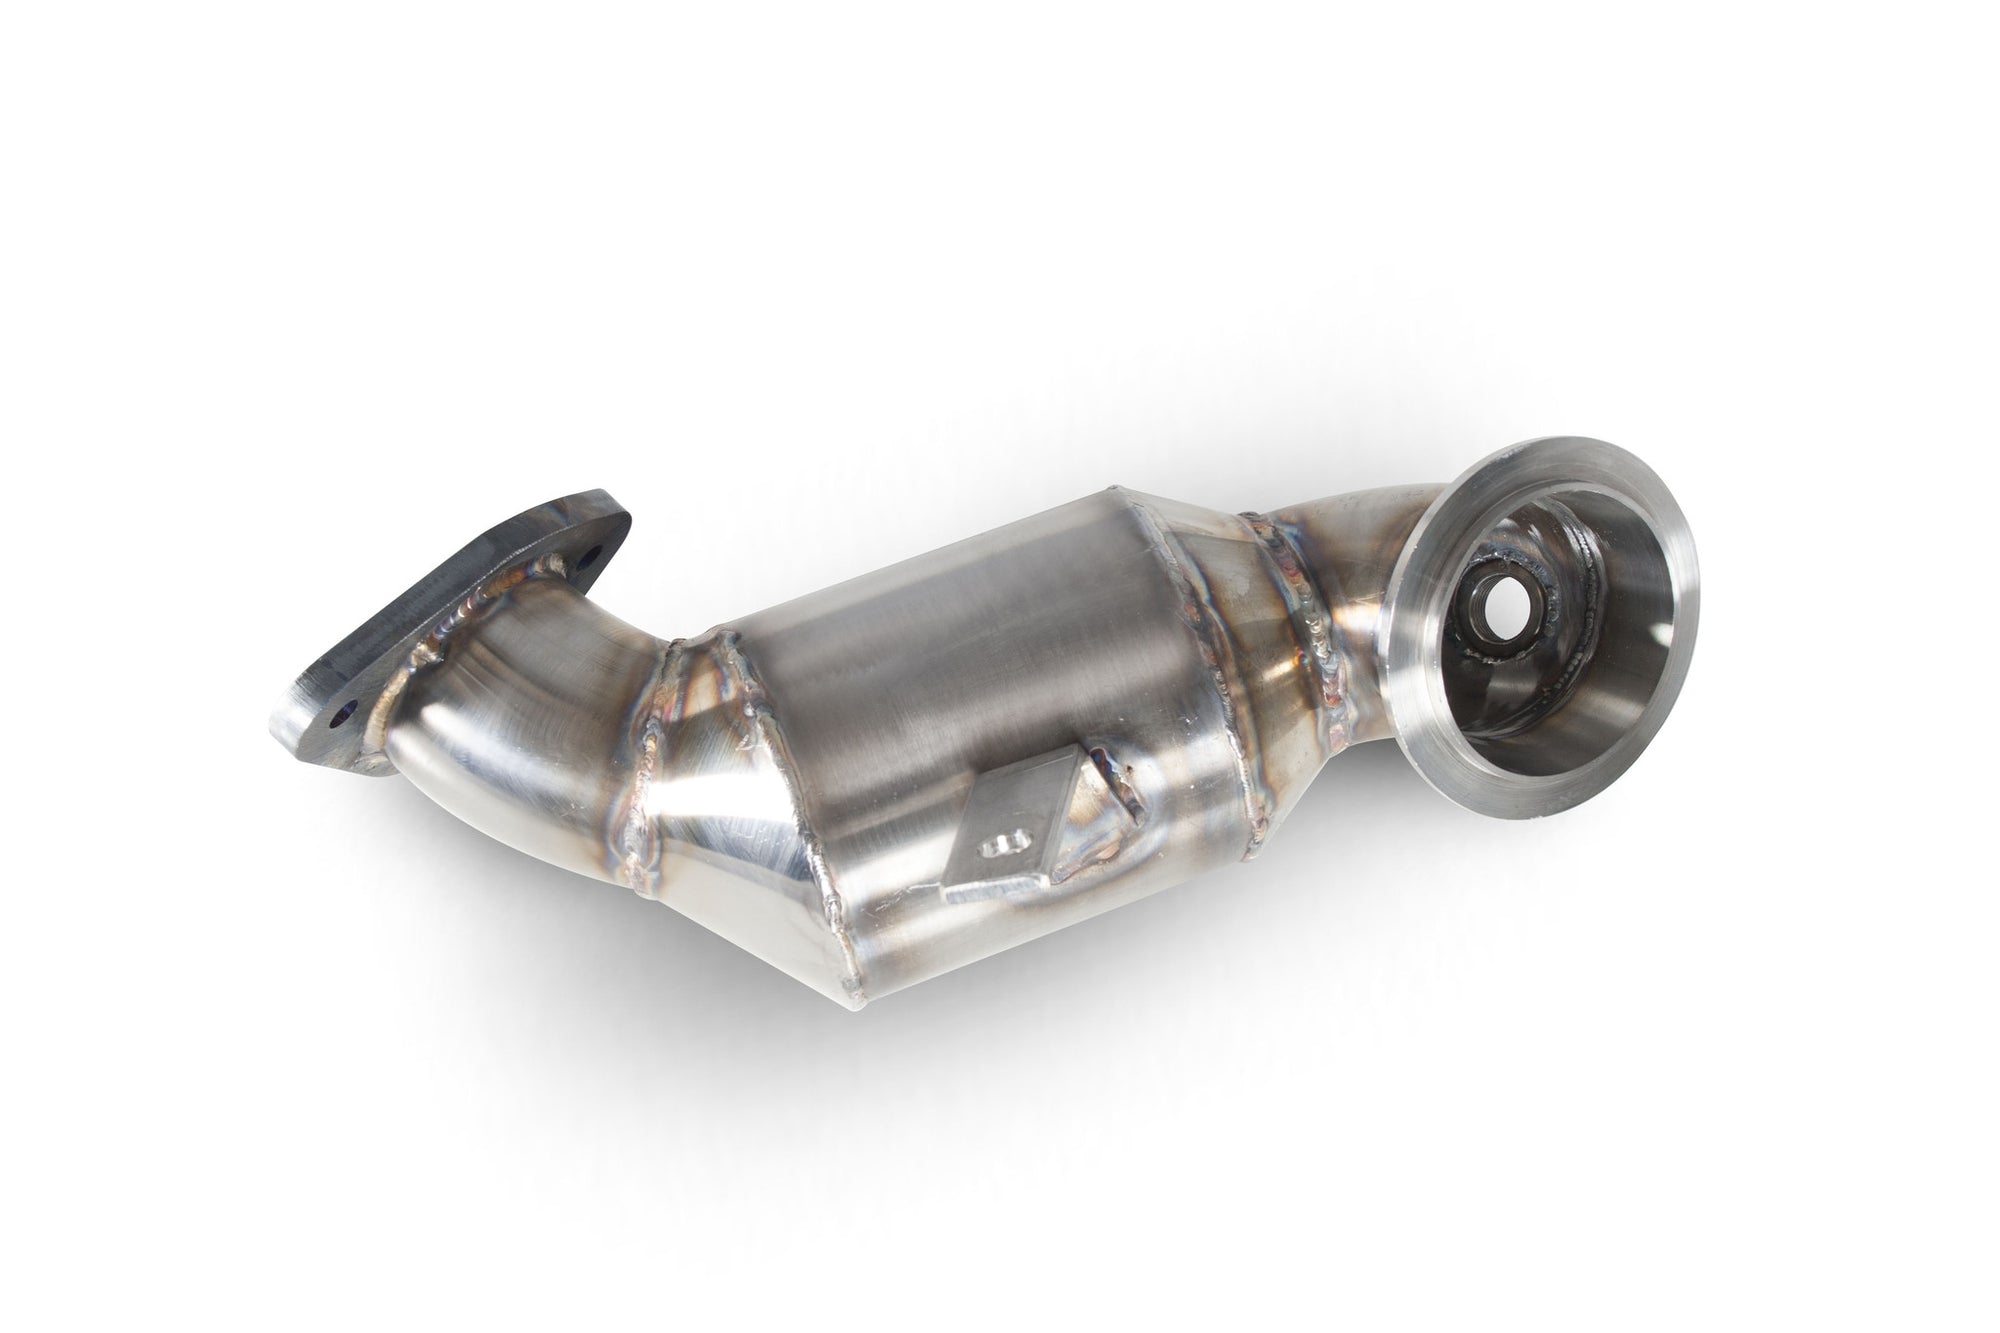 Vauxhall Astra GTC 1.4 Turbo  Downpipe with high flow sports catalyst